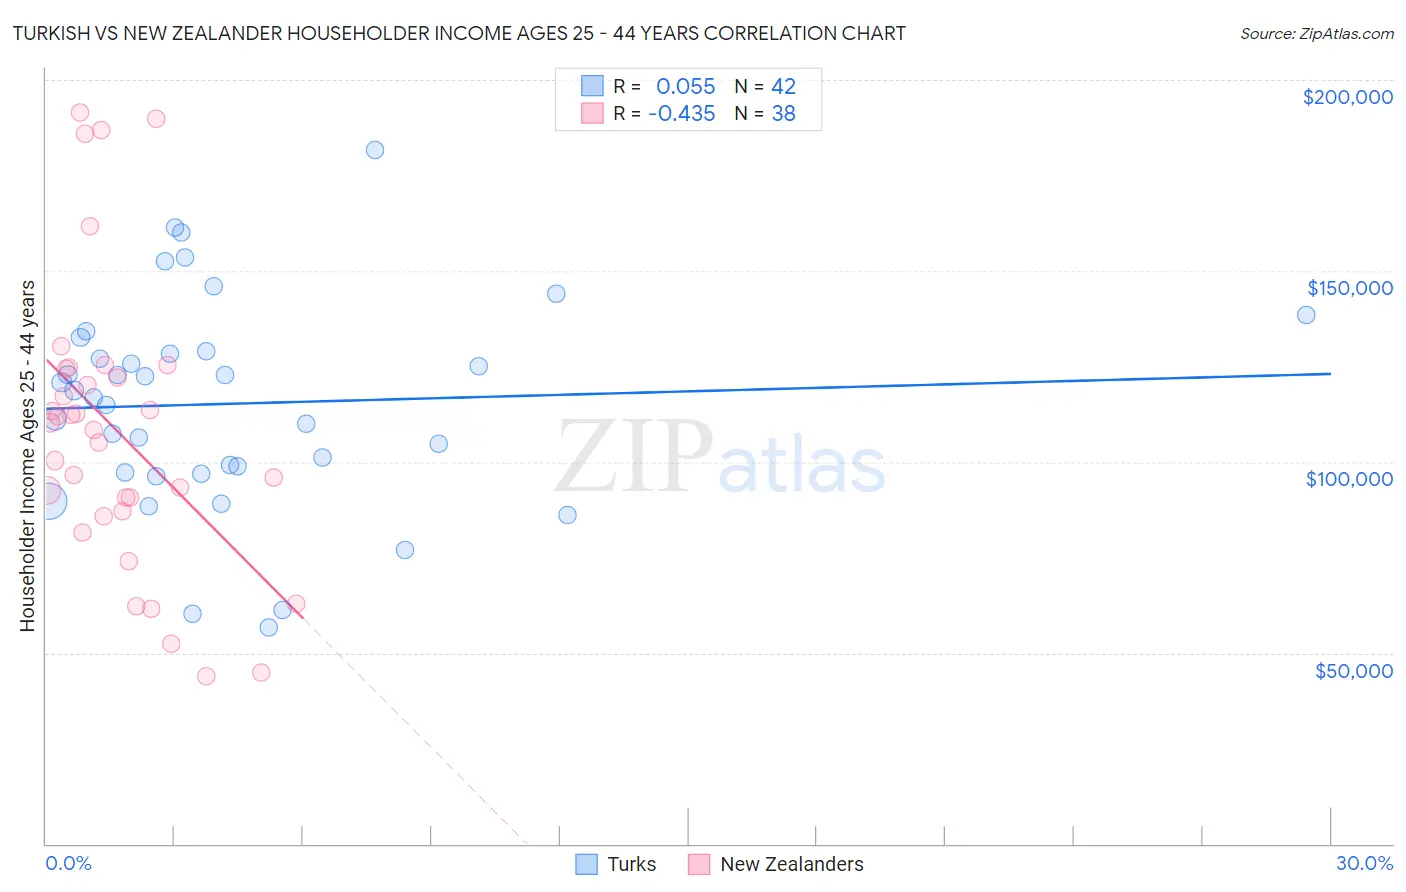 Turkish vs New Zealander Householder Income Ages 25 - 44 years